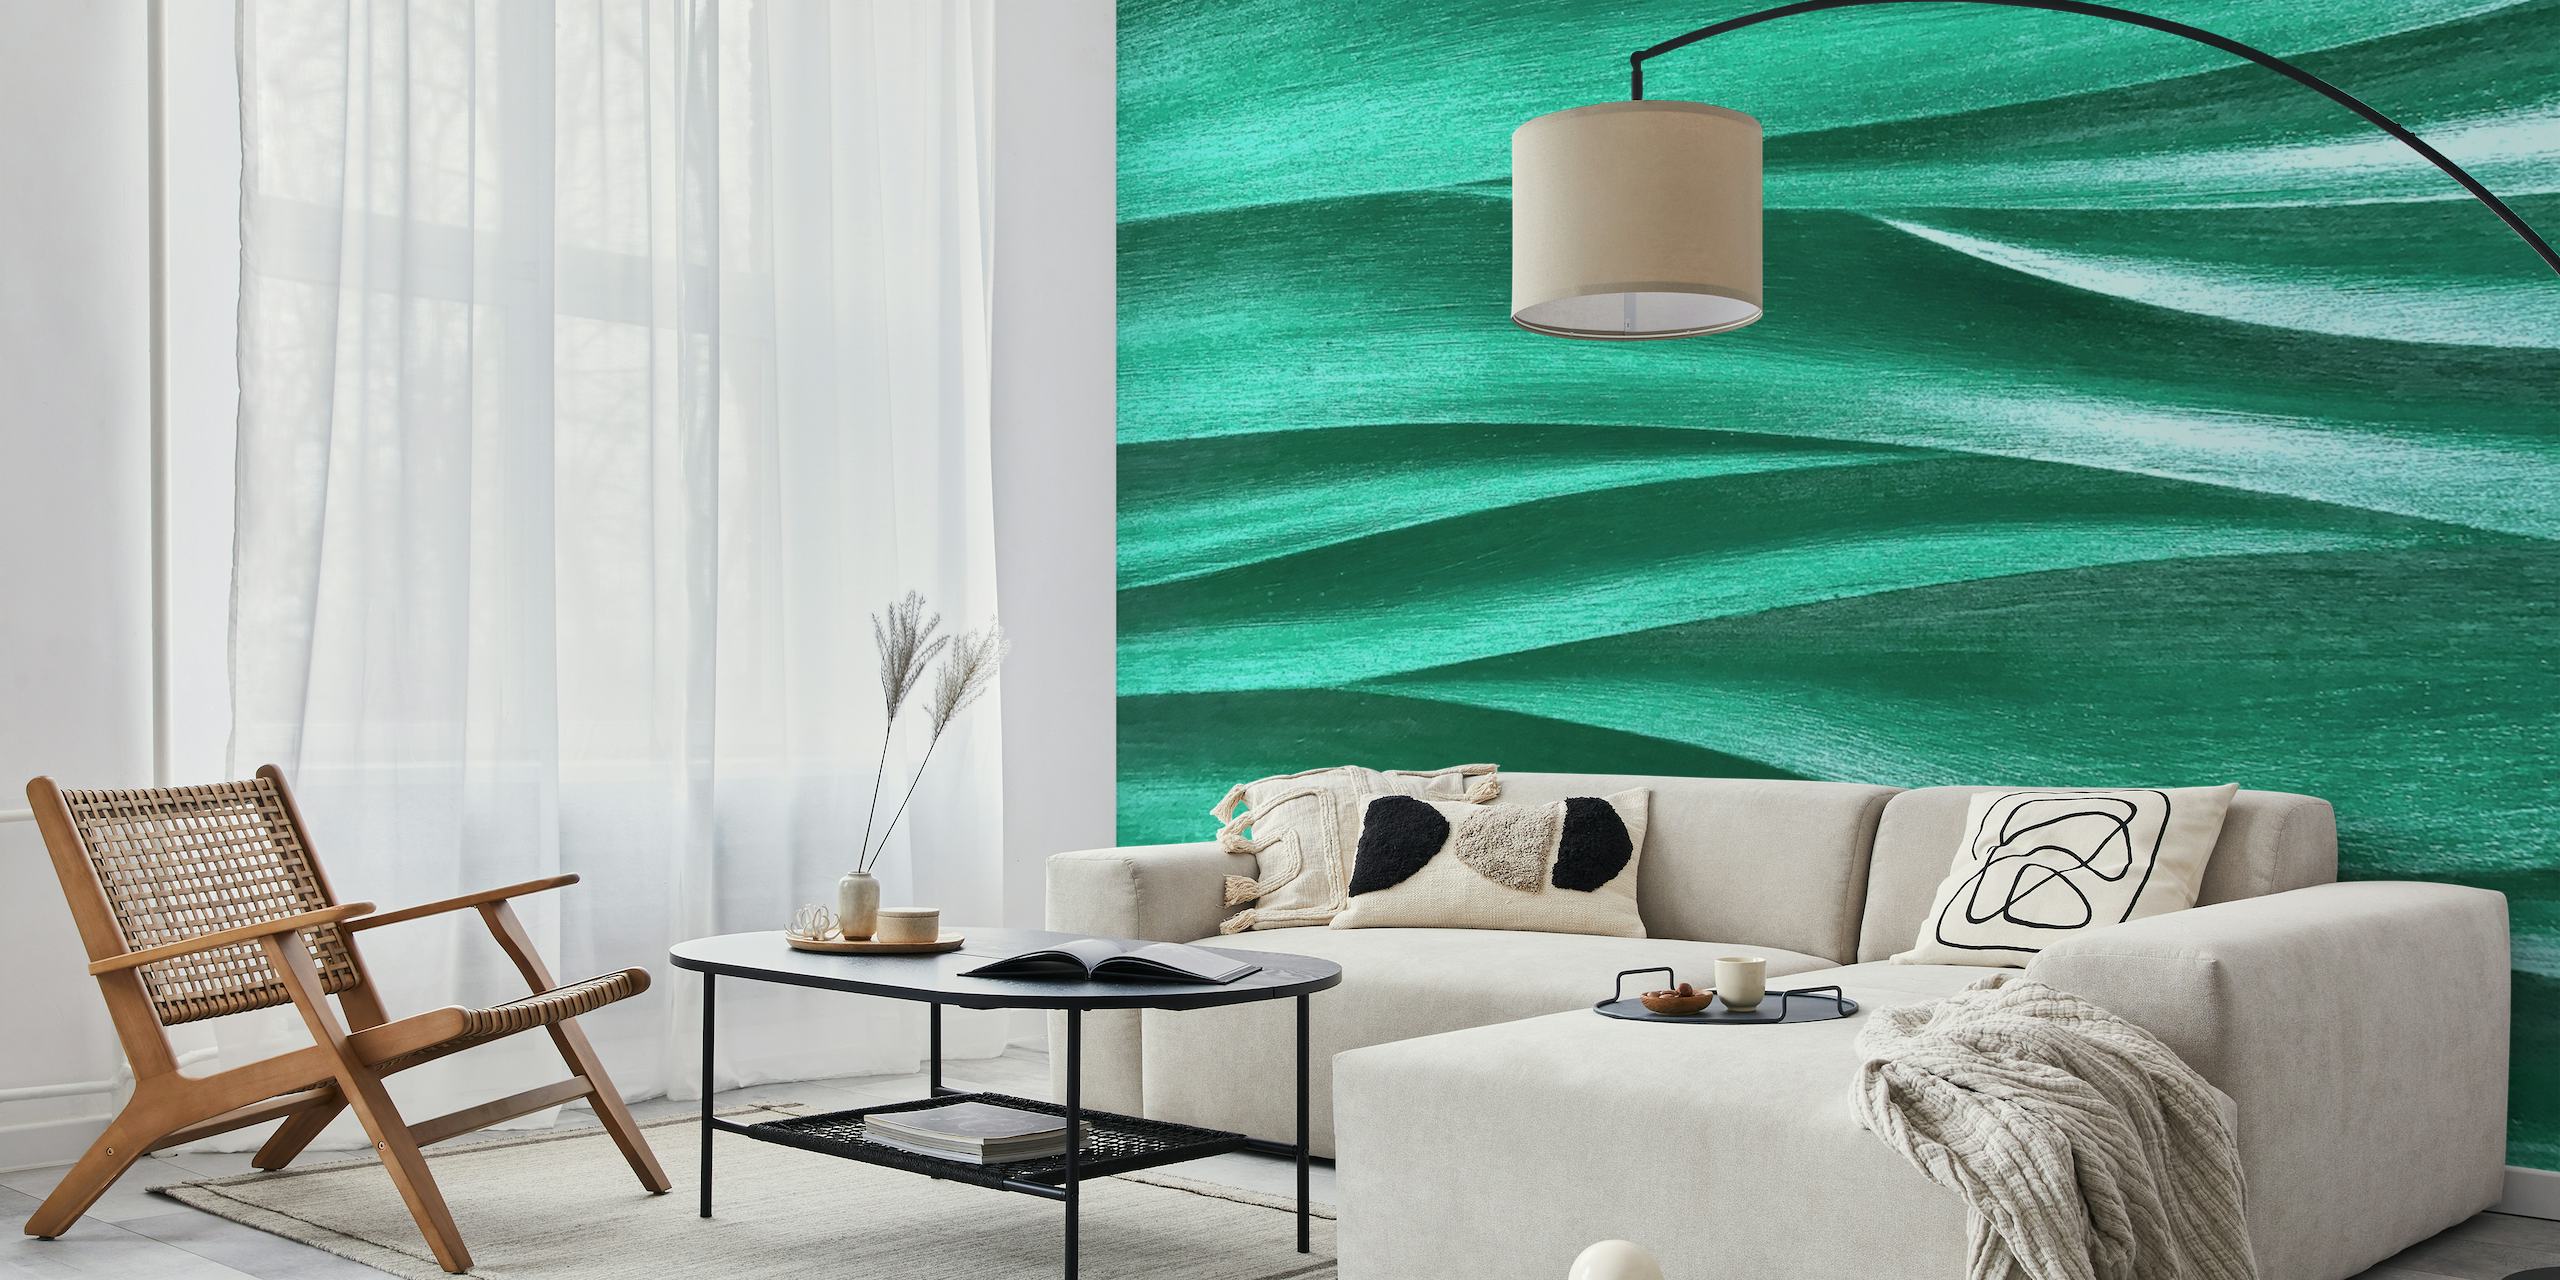 Emerald green wave pattern wall mural for a serene interior decoration.